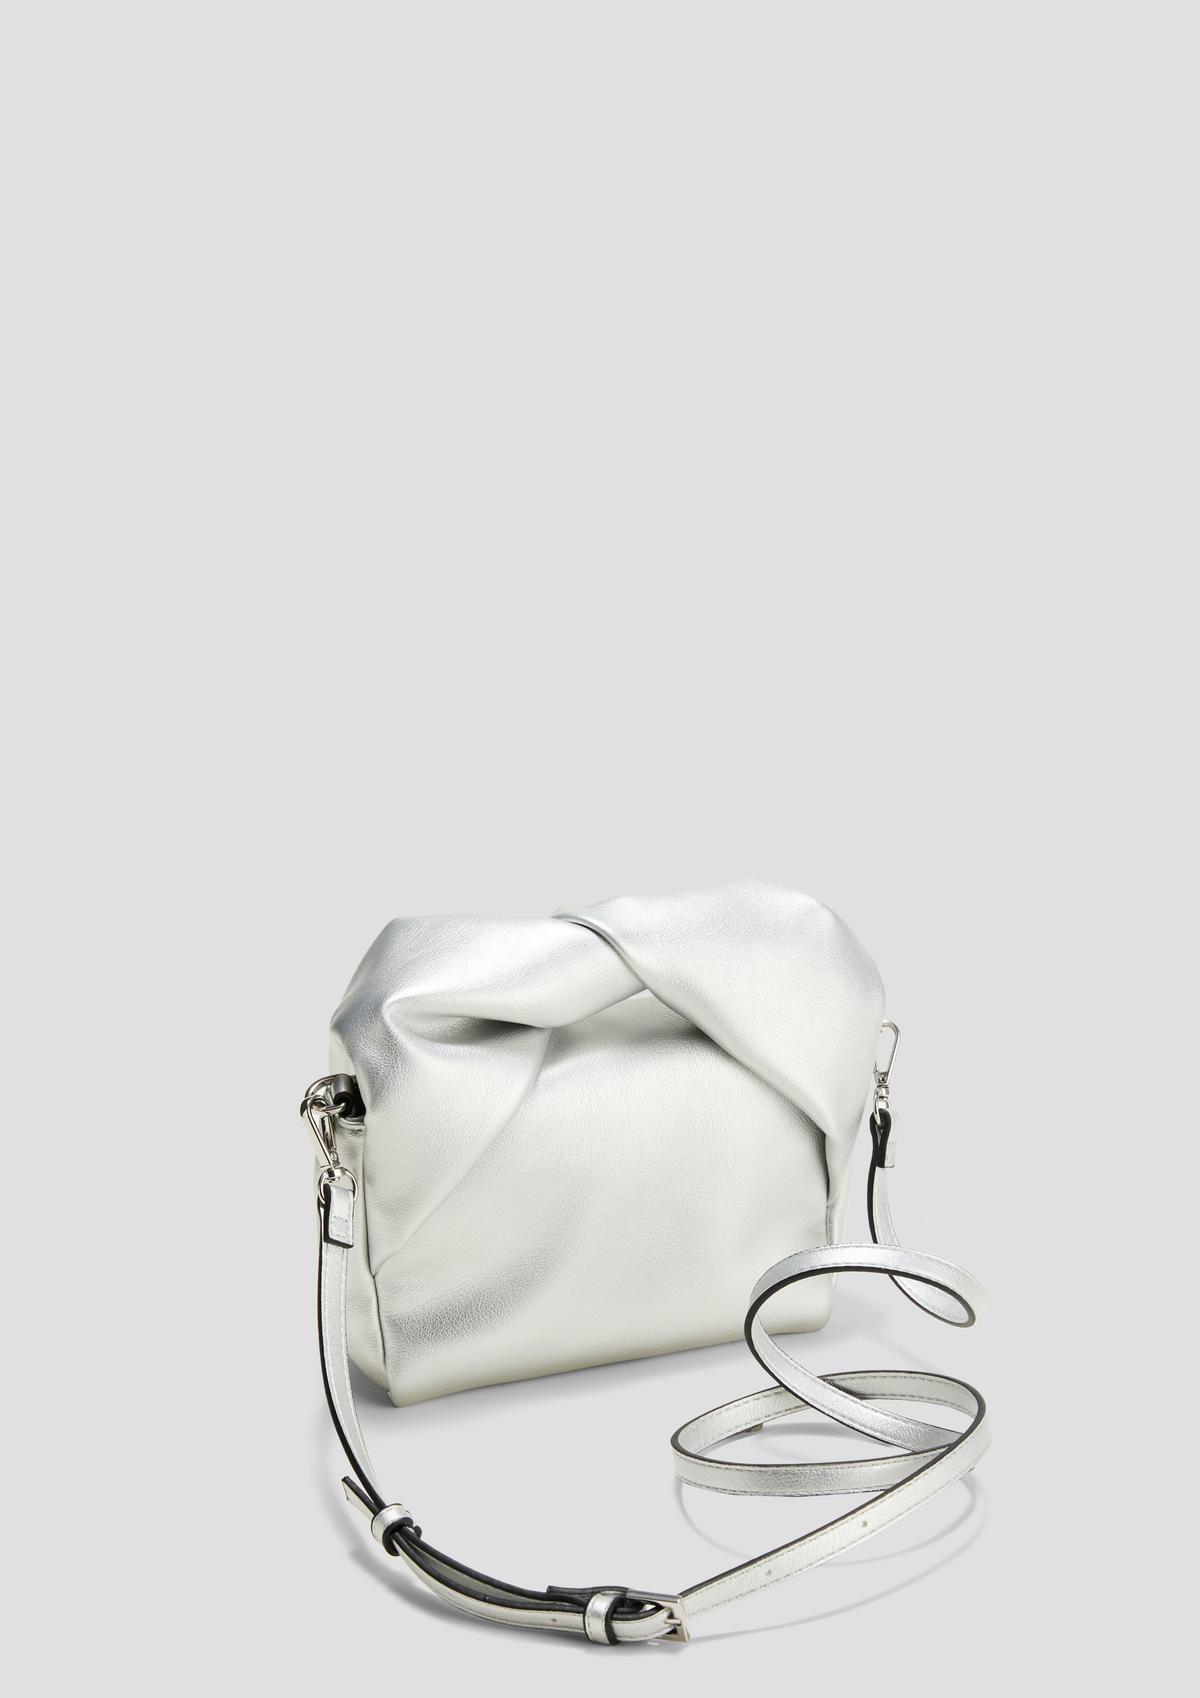 s.Oliver Bag with a knotted detail